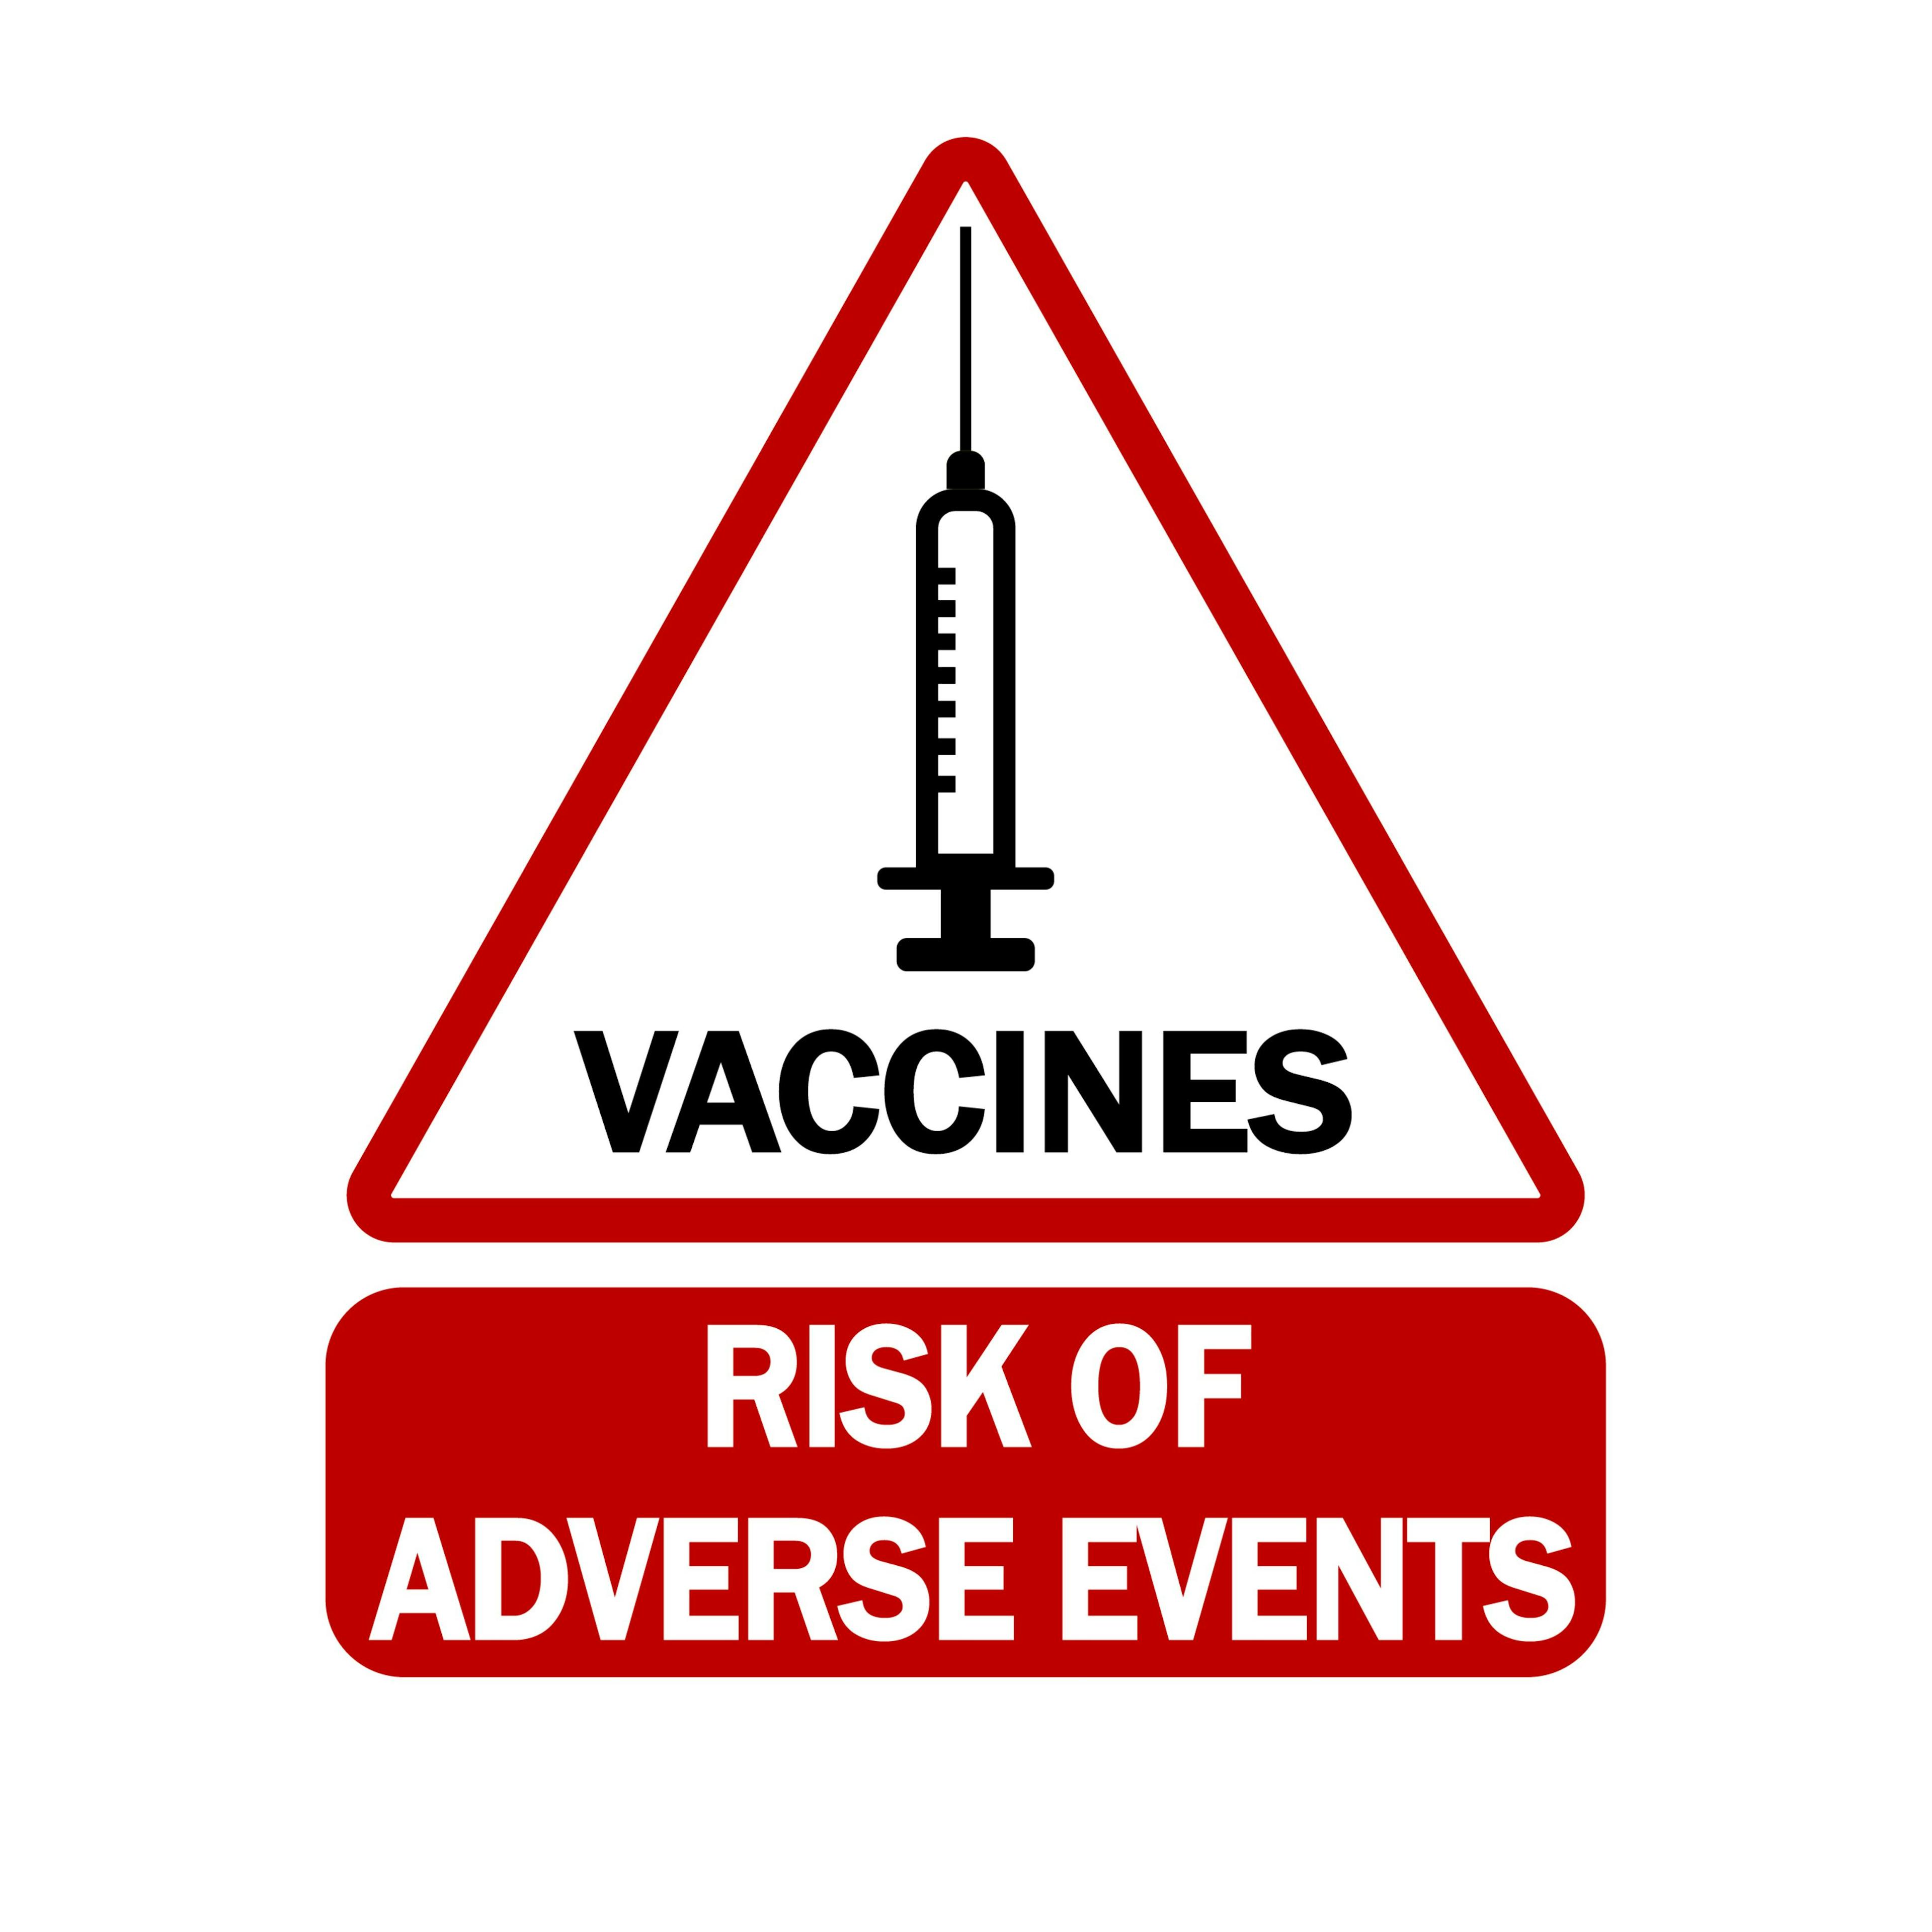 A new study found negative expectations prior to COVID-19 vaccination were associated with more systemic adverse events in individuals receiving their second dose of a COVID-19 vaccine.